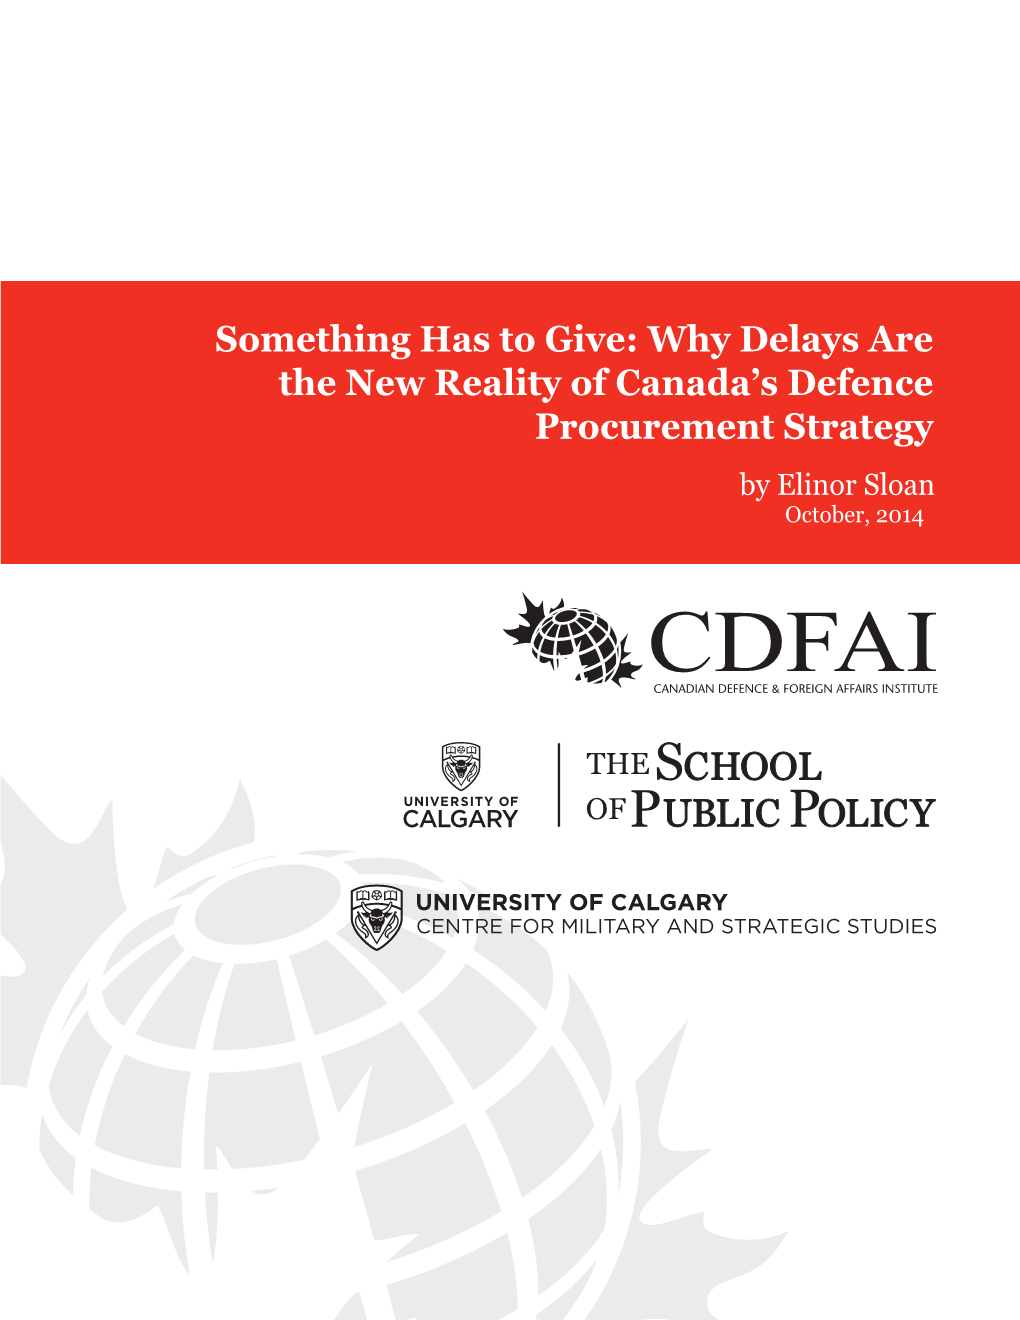 Something Has to Give: Why Delays Are the New Reality of Canada's